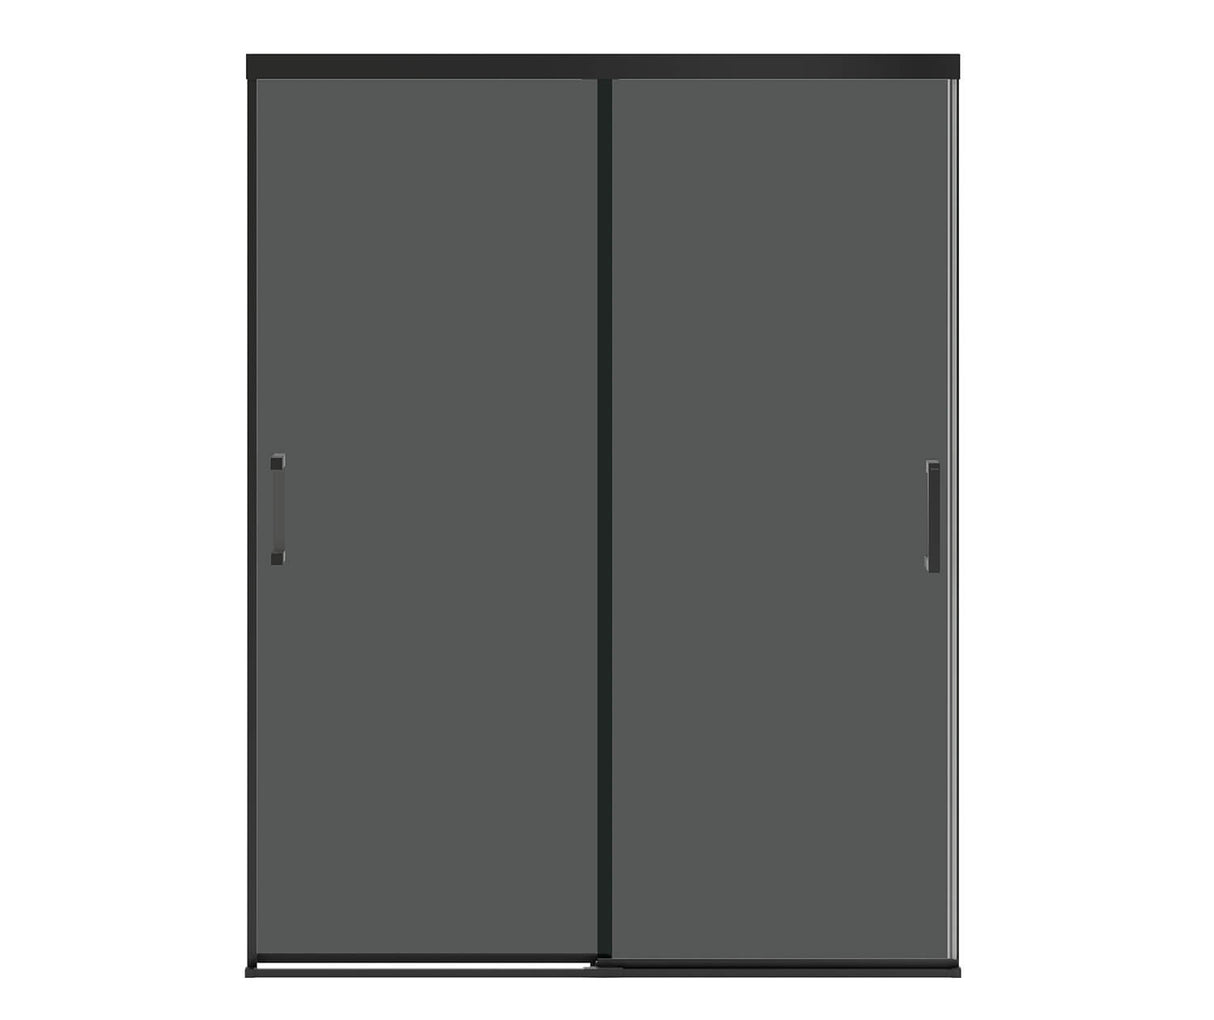 MAAX 136335-973-340-000 Incognito 76 Smoke 56-59 x 76 in. 8mm Bypass Shower Door for Alcove Installation with Dark Smoke glass in Matte Black